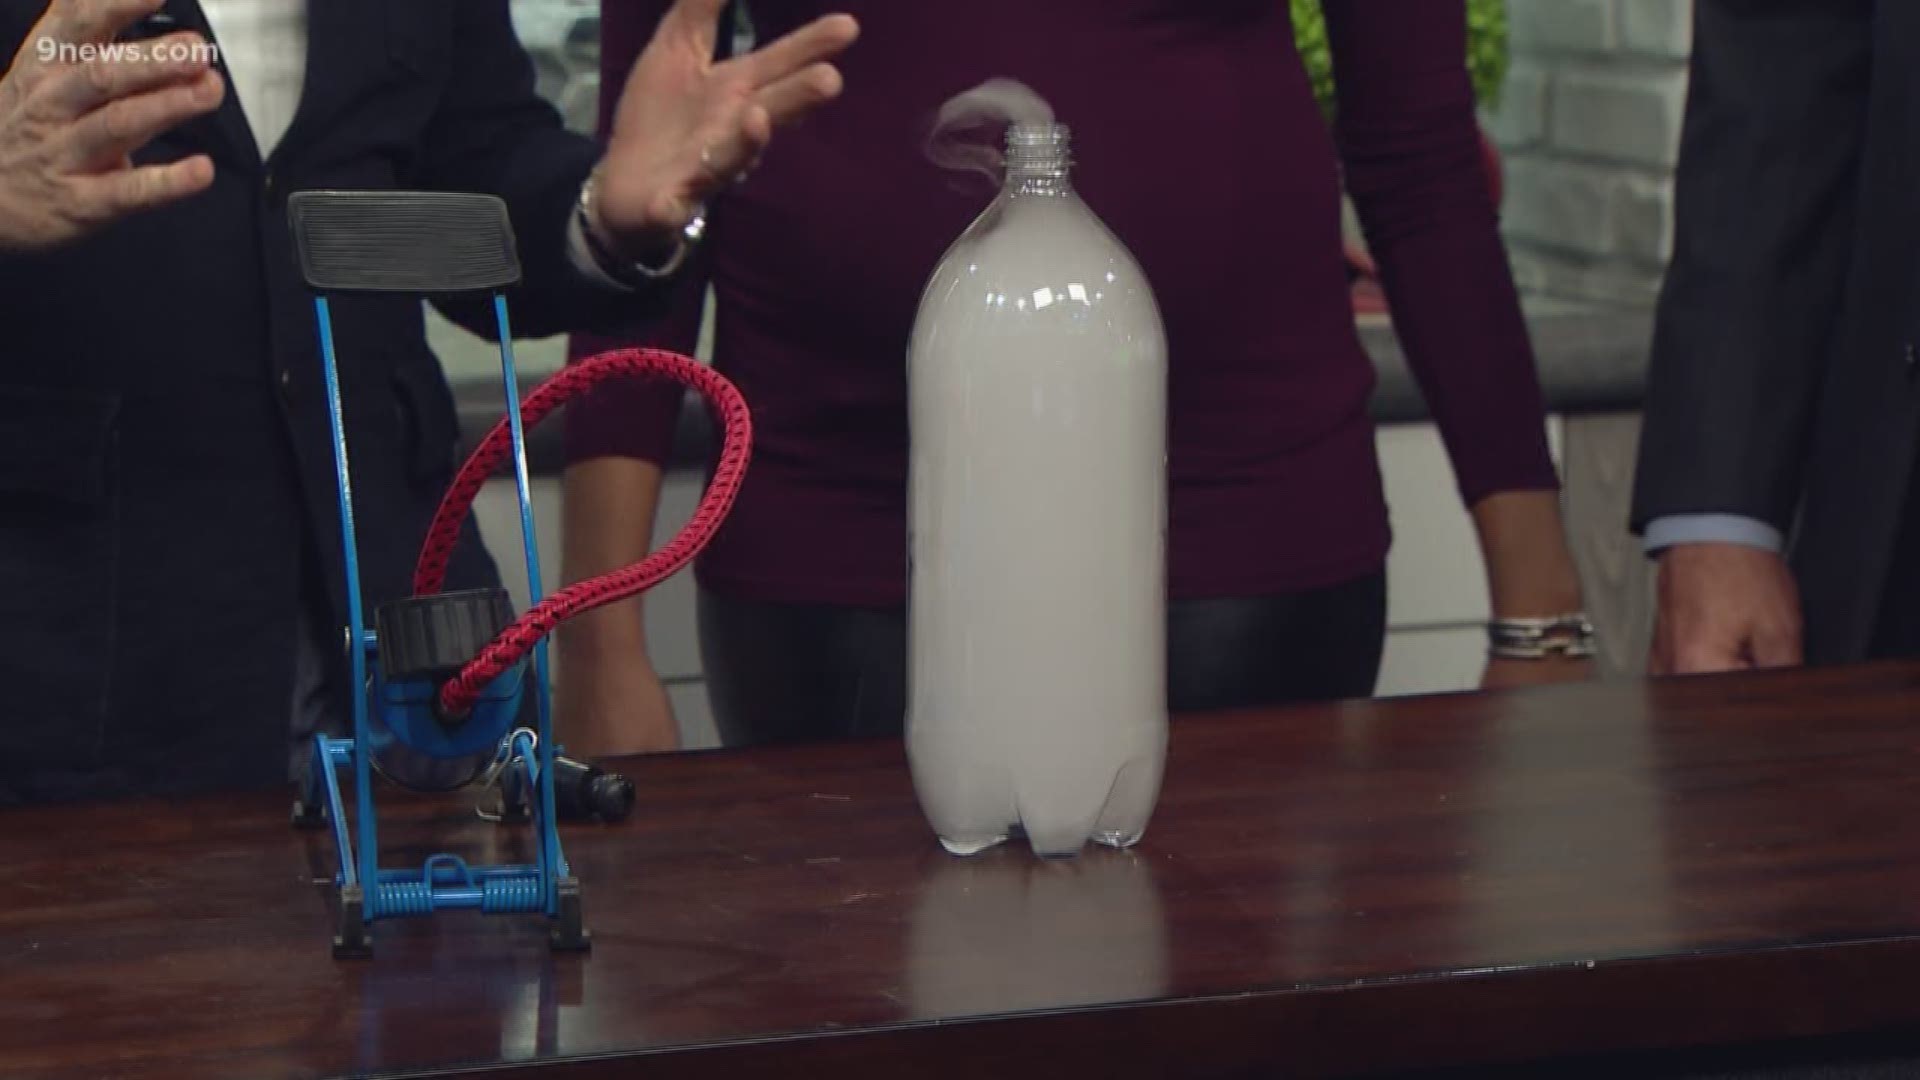 Our science guy Steve Spangler demonstrates a cool way to make a cloud in a bottle.